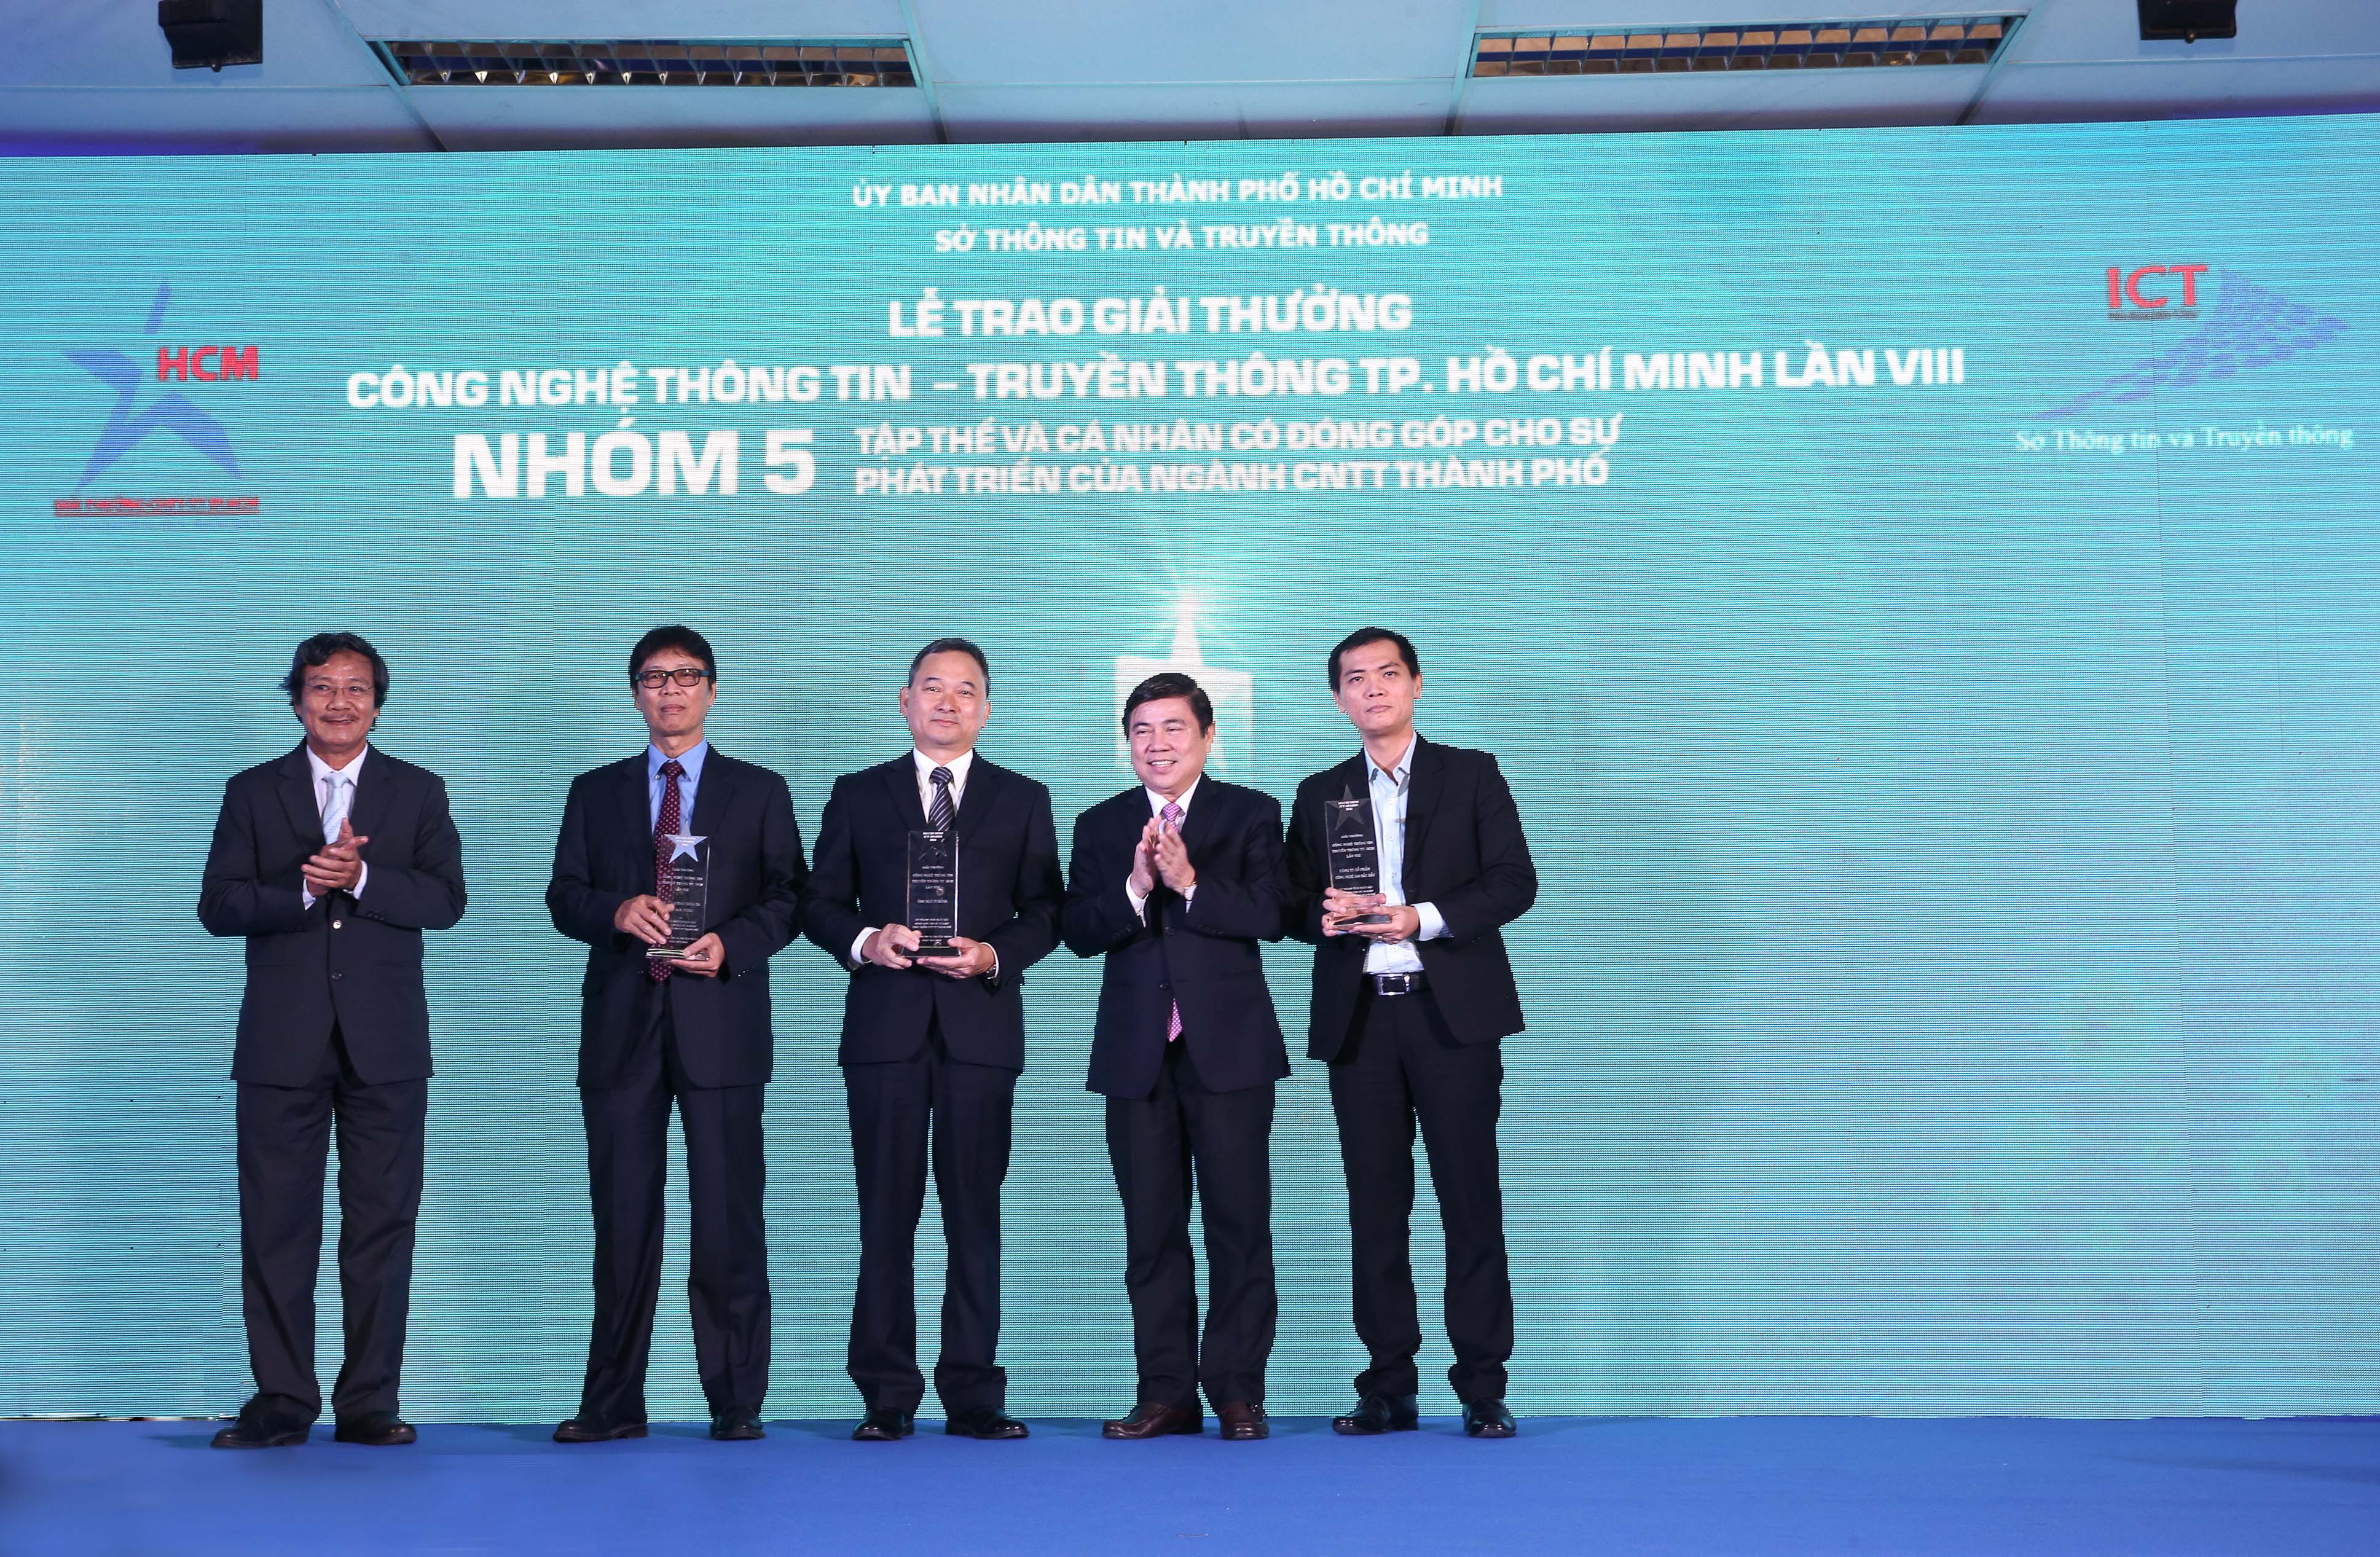 Sao Bac Dau received the award "the firm with excellent achievements contributing to the metropolitan’s IT - development"